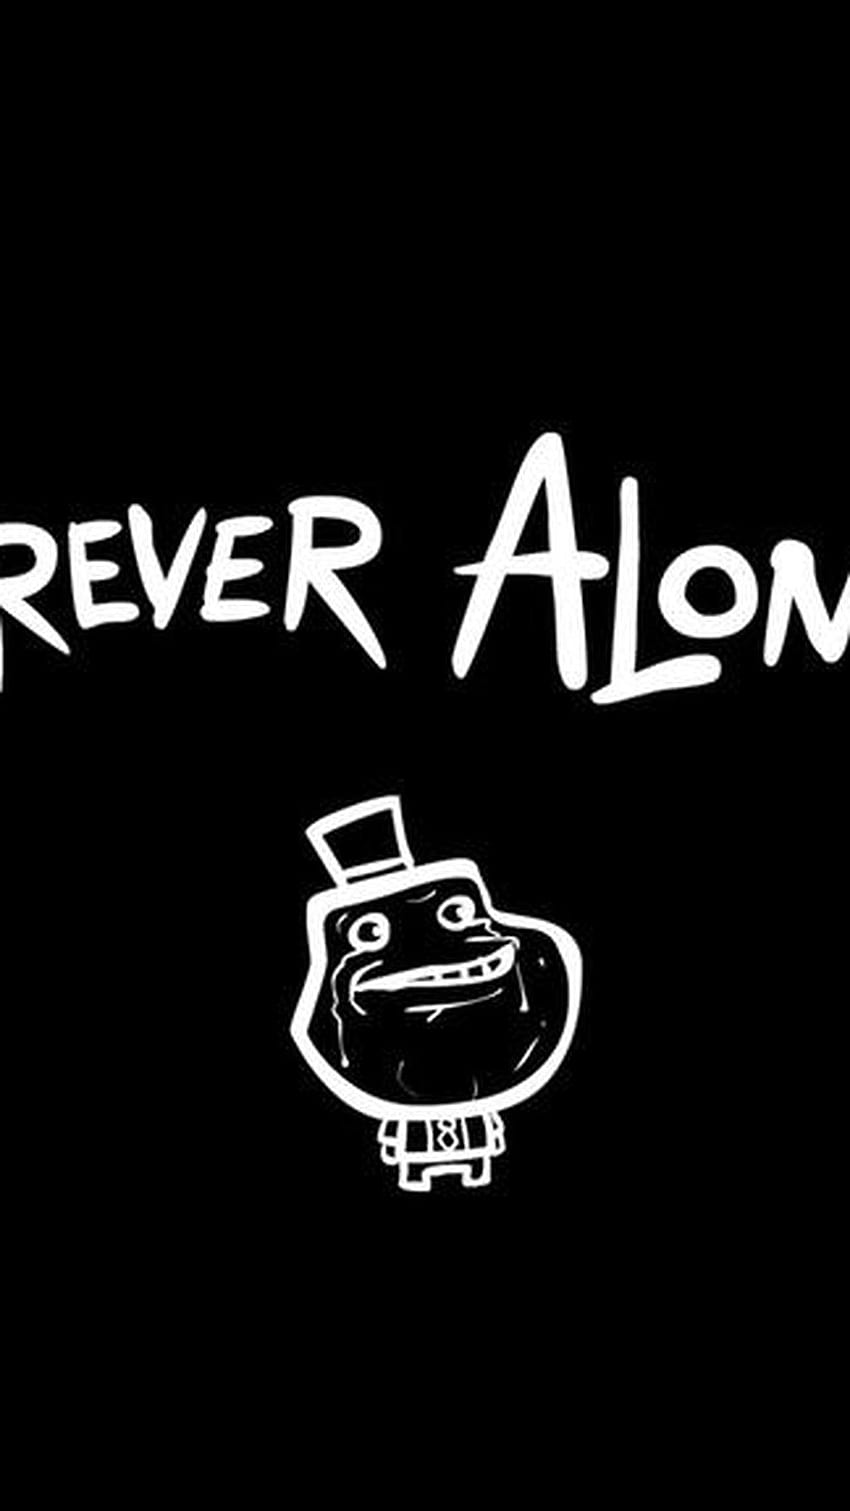 Forever Alone Emo for iPhone 8 Plus, iPhone 6s Plus HD phone wallpaper